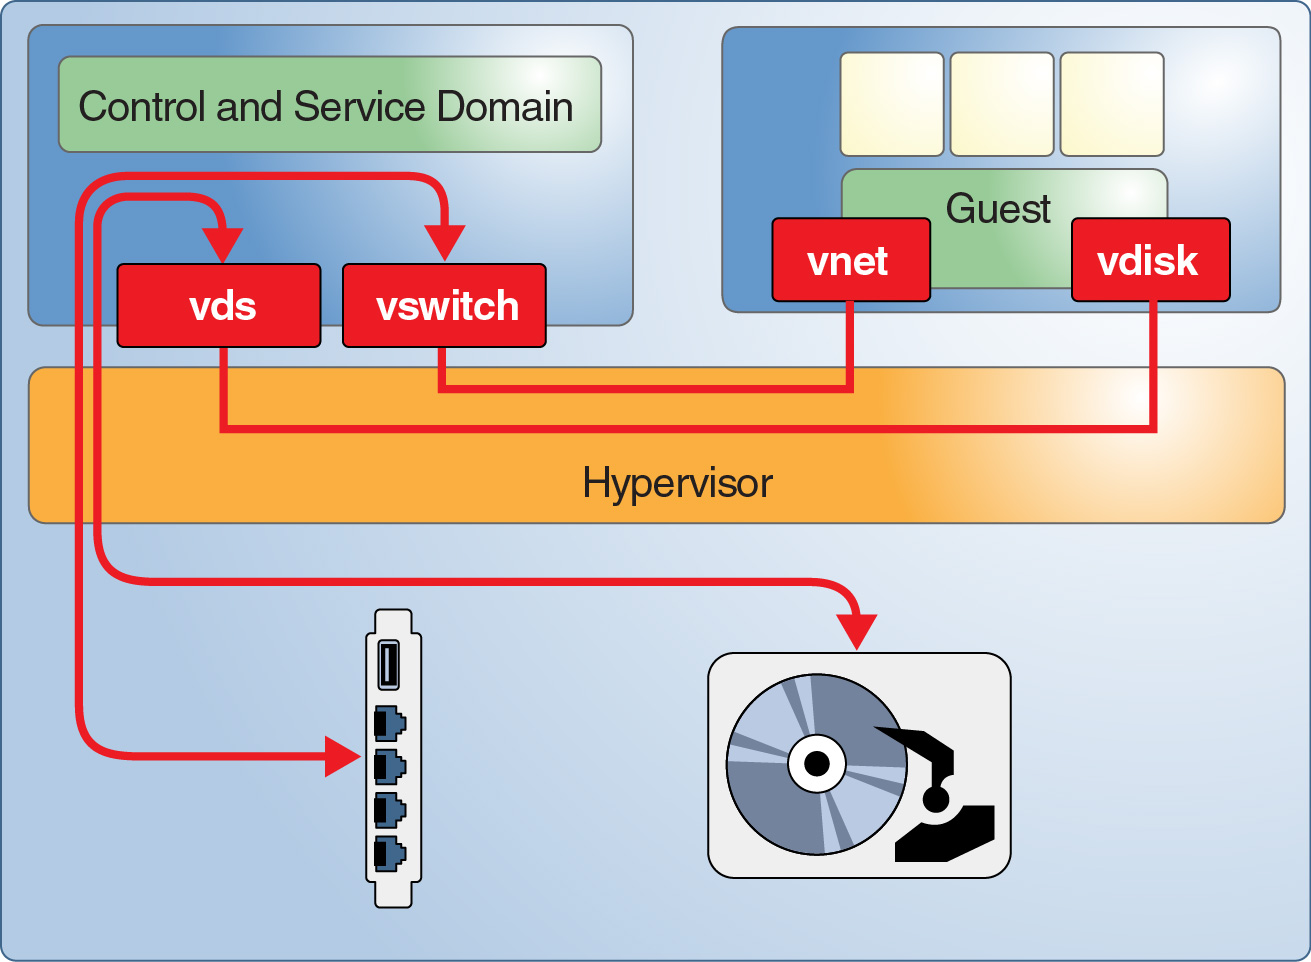 image:Graphic shows a common Oracle VM Server for SPARC environment with control domain providing services and hardware resources to a guest domain.